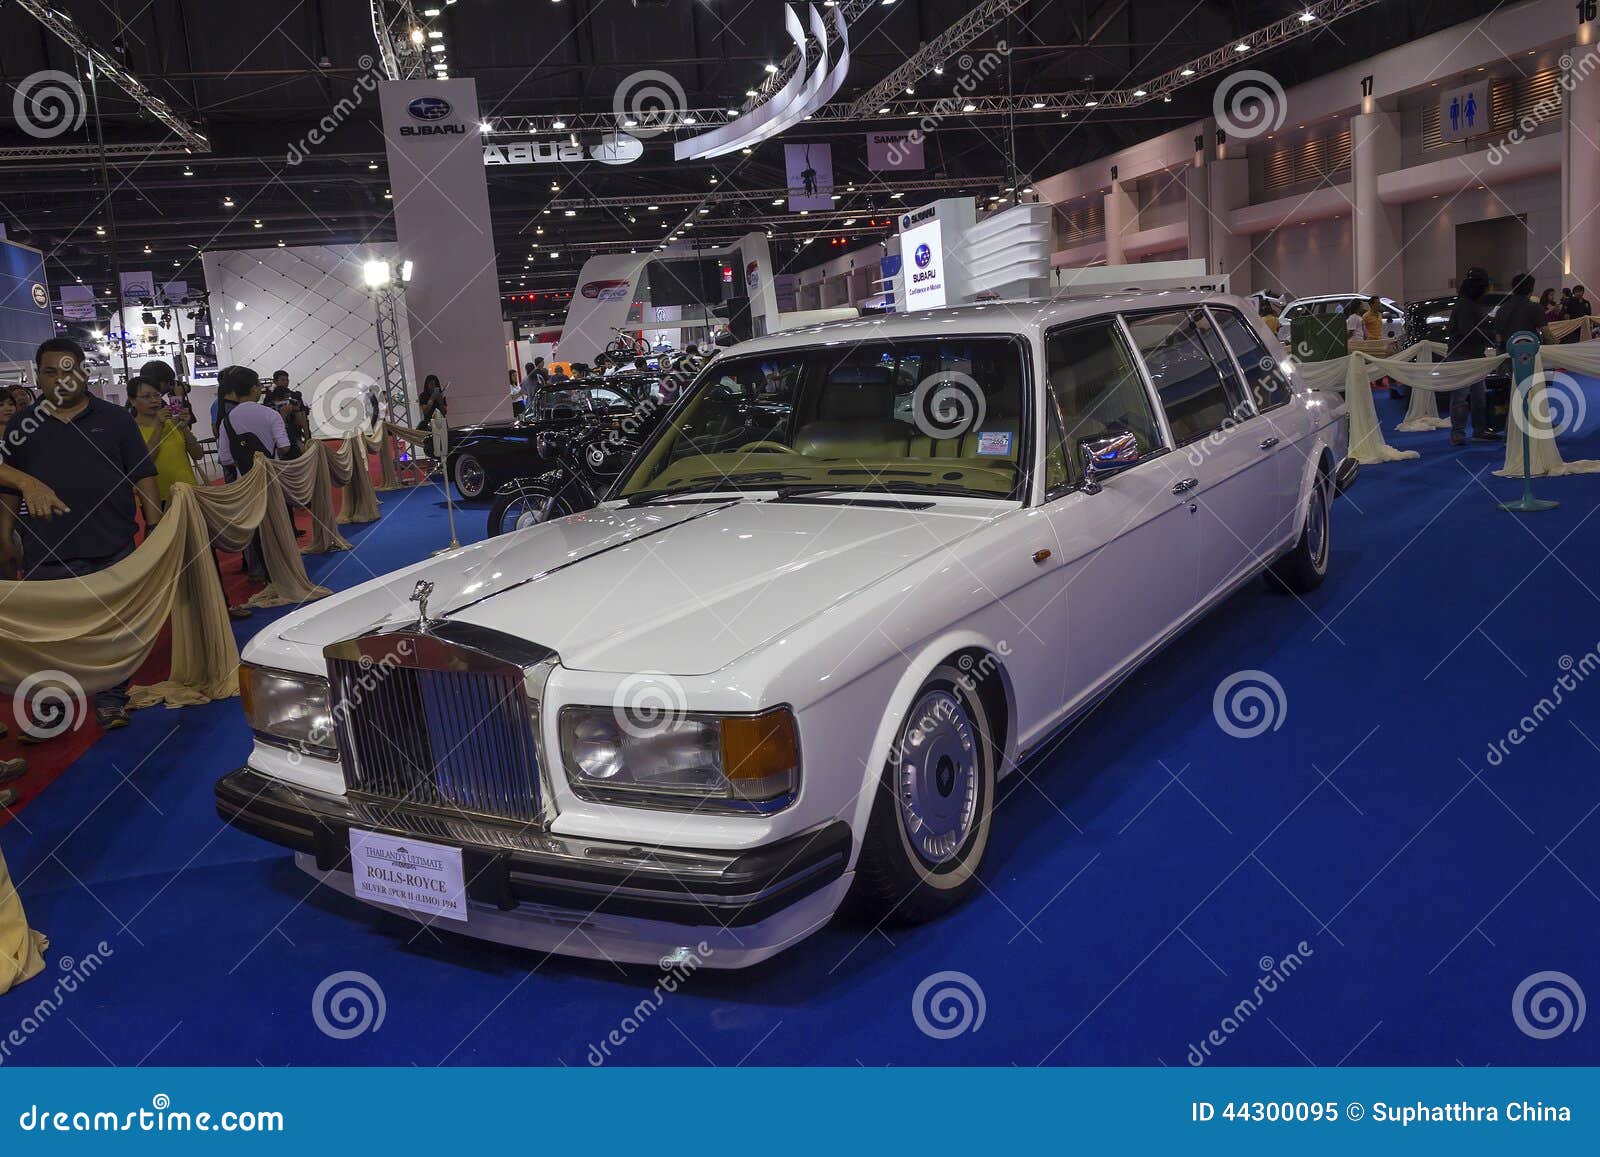 Used 1990 RollsRoyce Silver Spur For Sale 56900  Motorcar Classics  Stock 2252